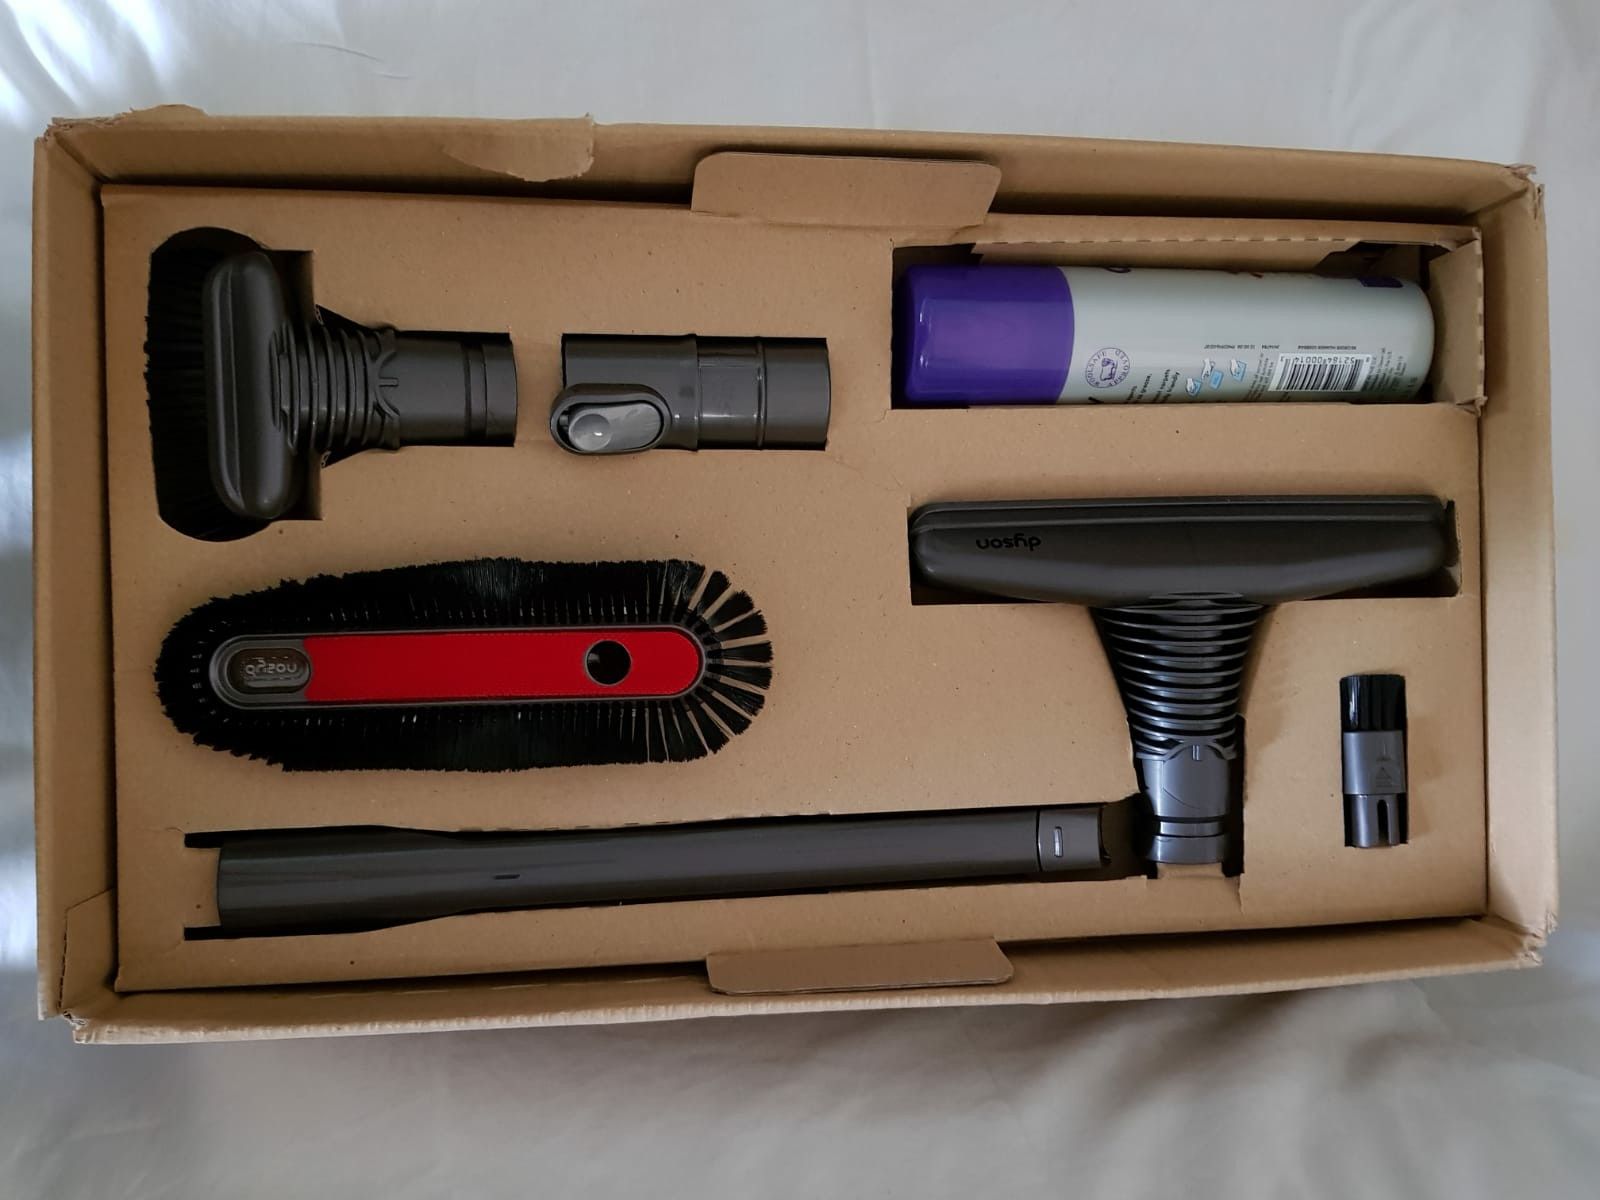 Dyson full cleaning kit